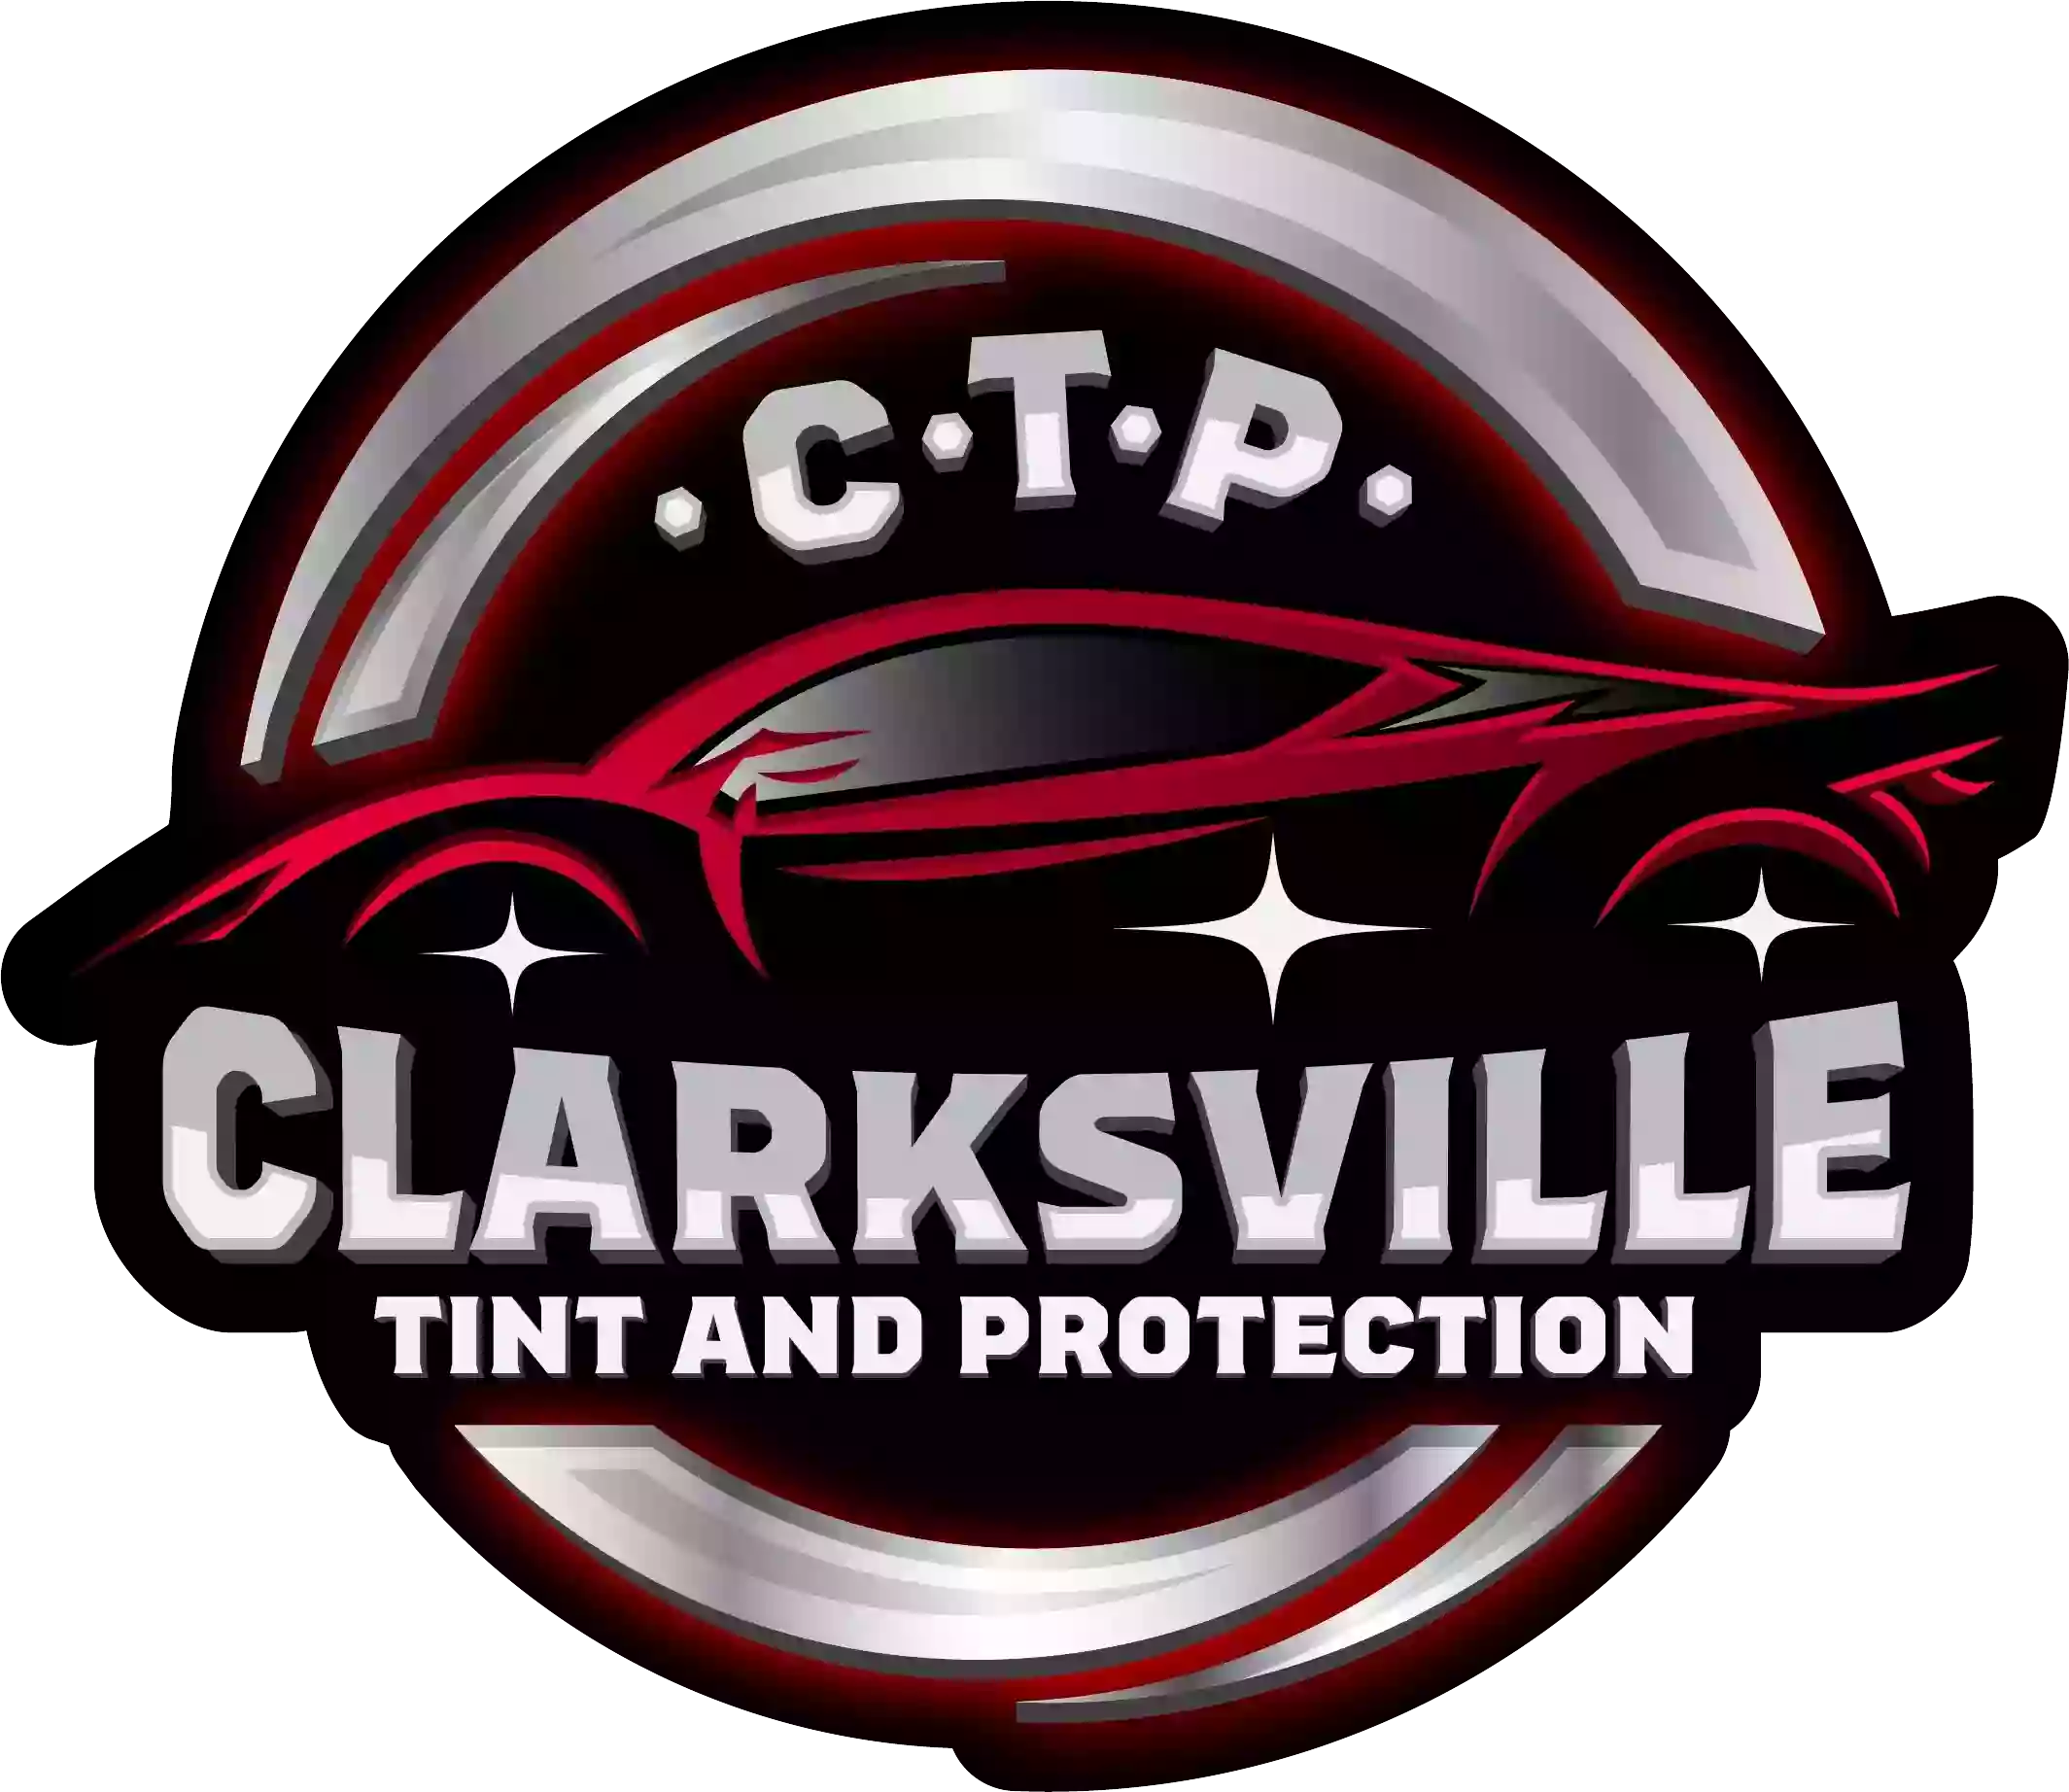 Clarksville Tint and Protection